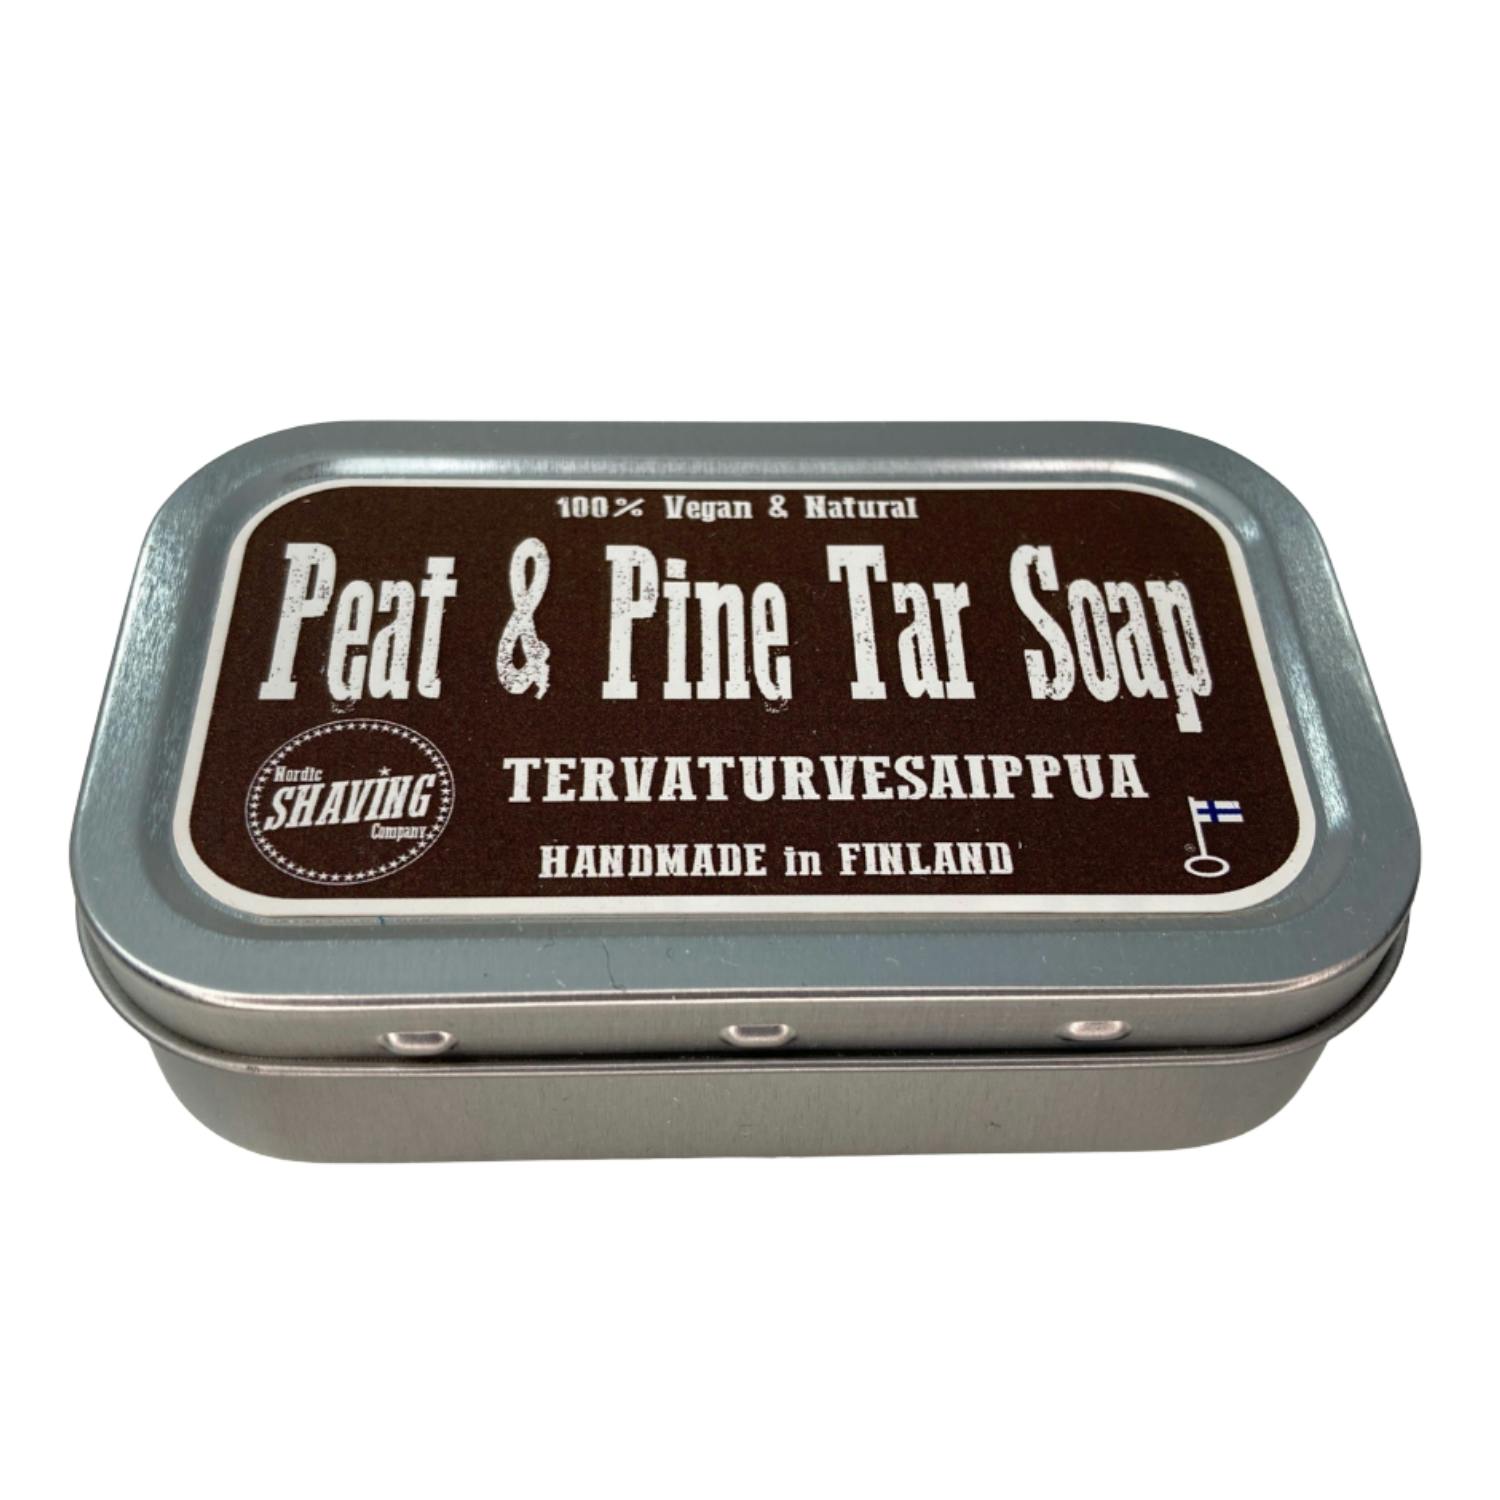 Retro tin of natural soap makes a great gift for men or the traditional Finnish sauna. with natural peat and tar scent.